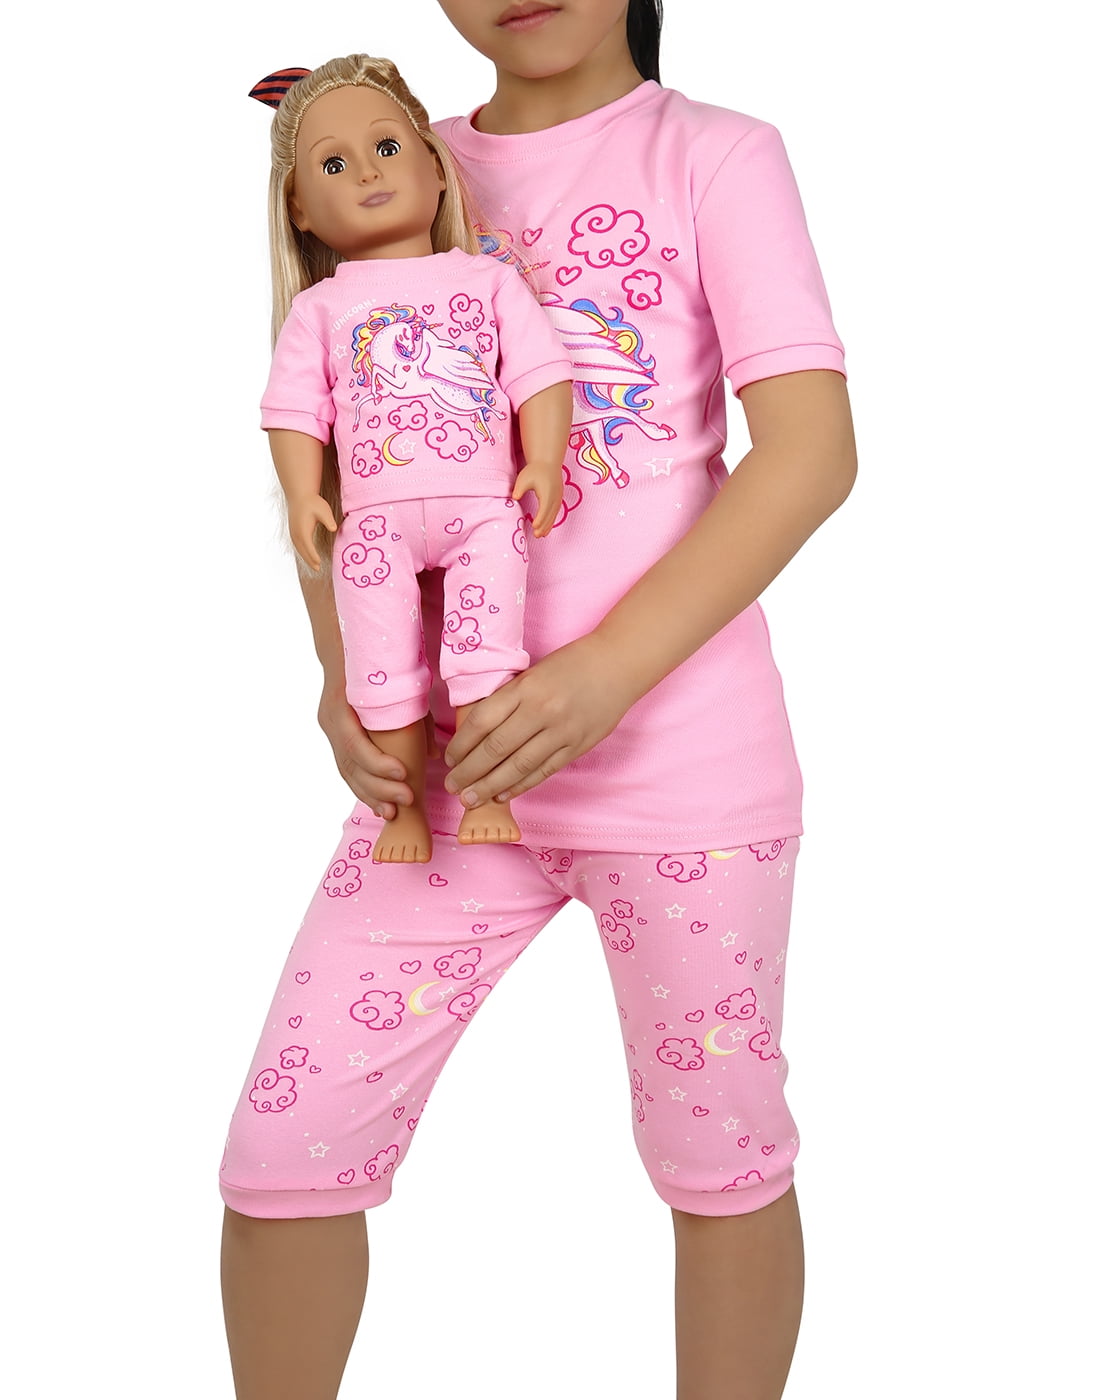 Flannel Horse Jumping PJ's  Fits American Girl or 18" doll 